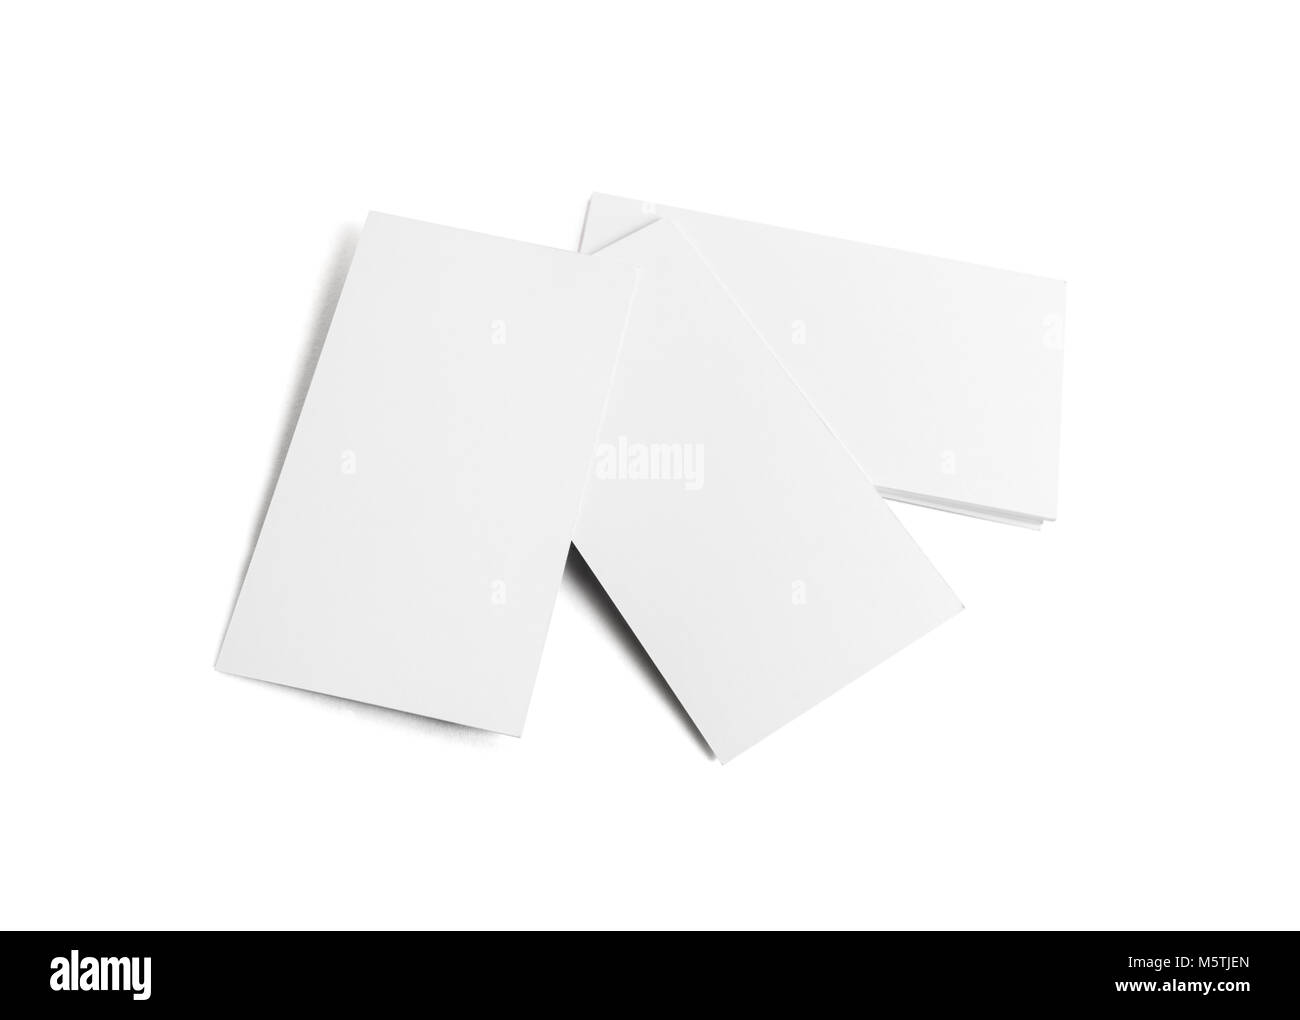 Stationery Cut Out Stock Images & Pictures - Alamy